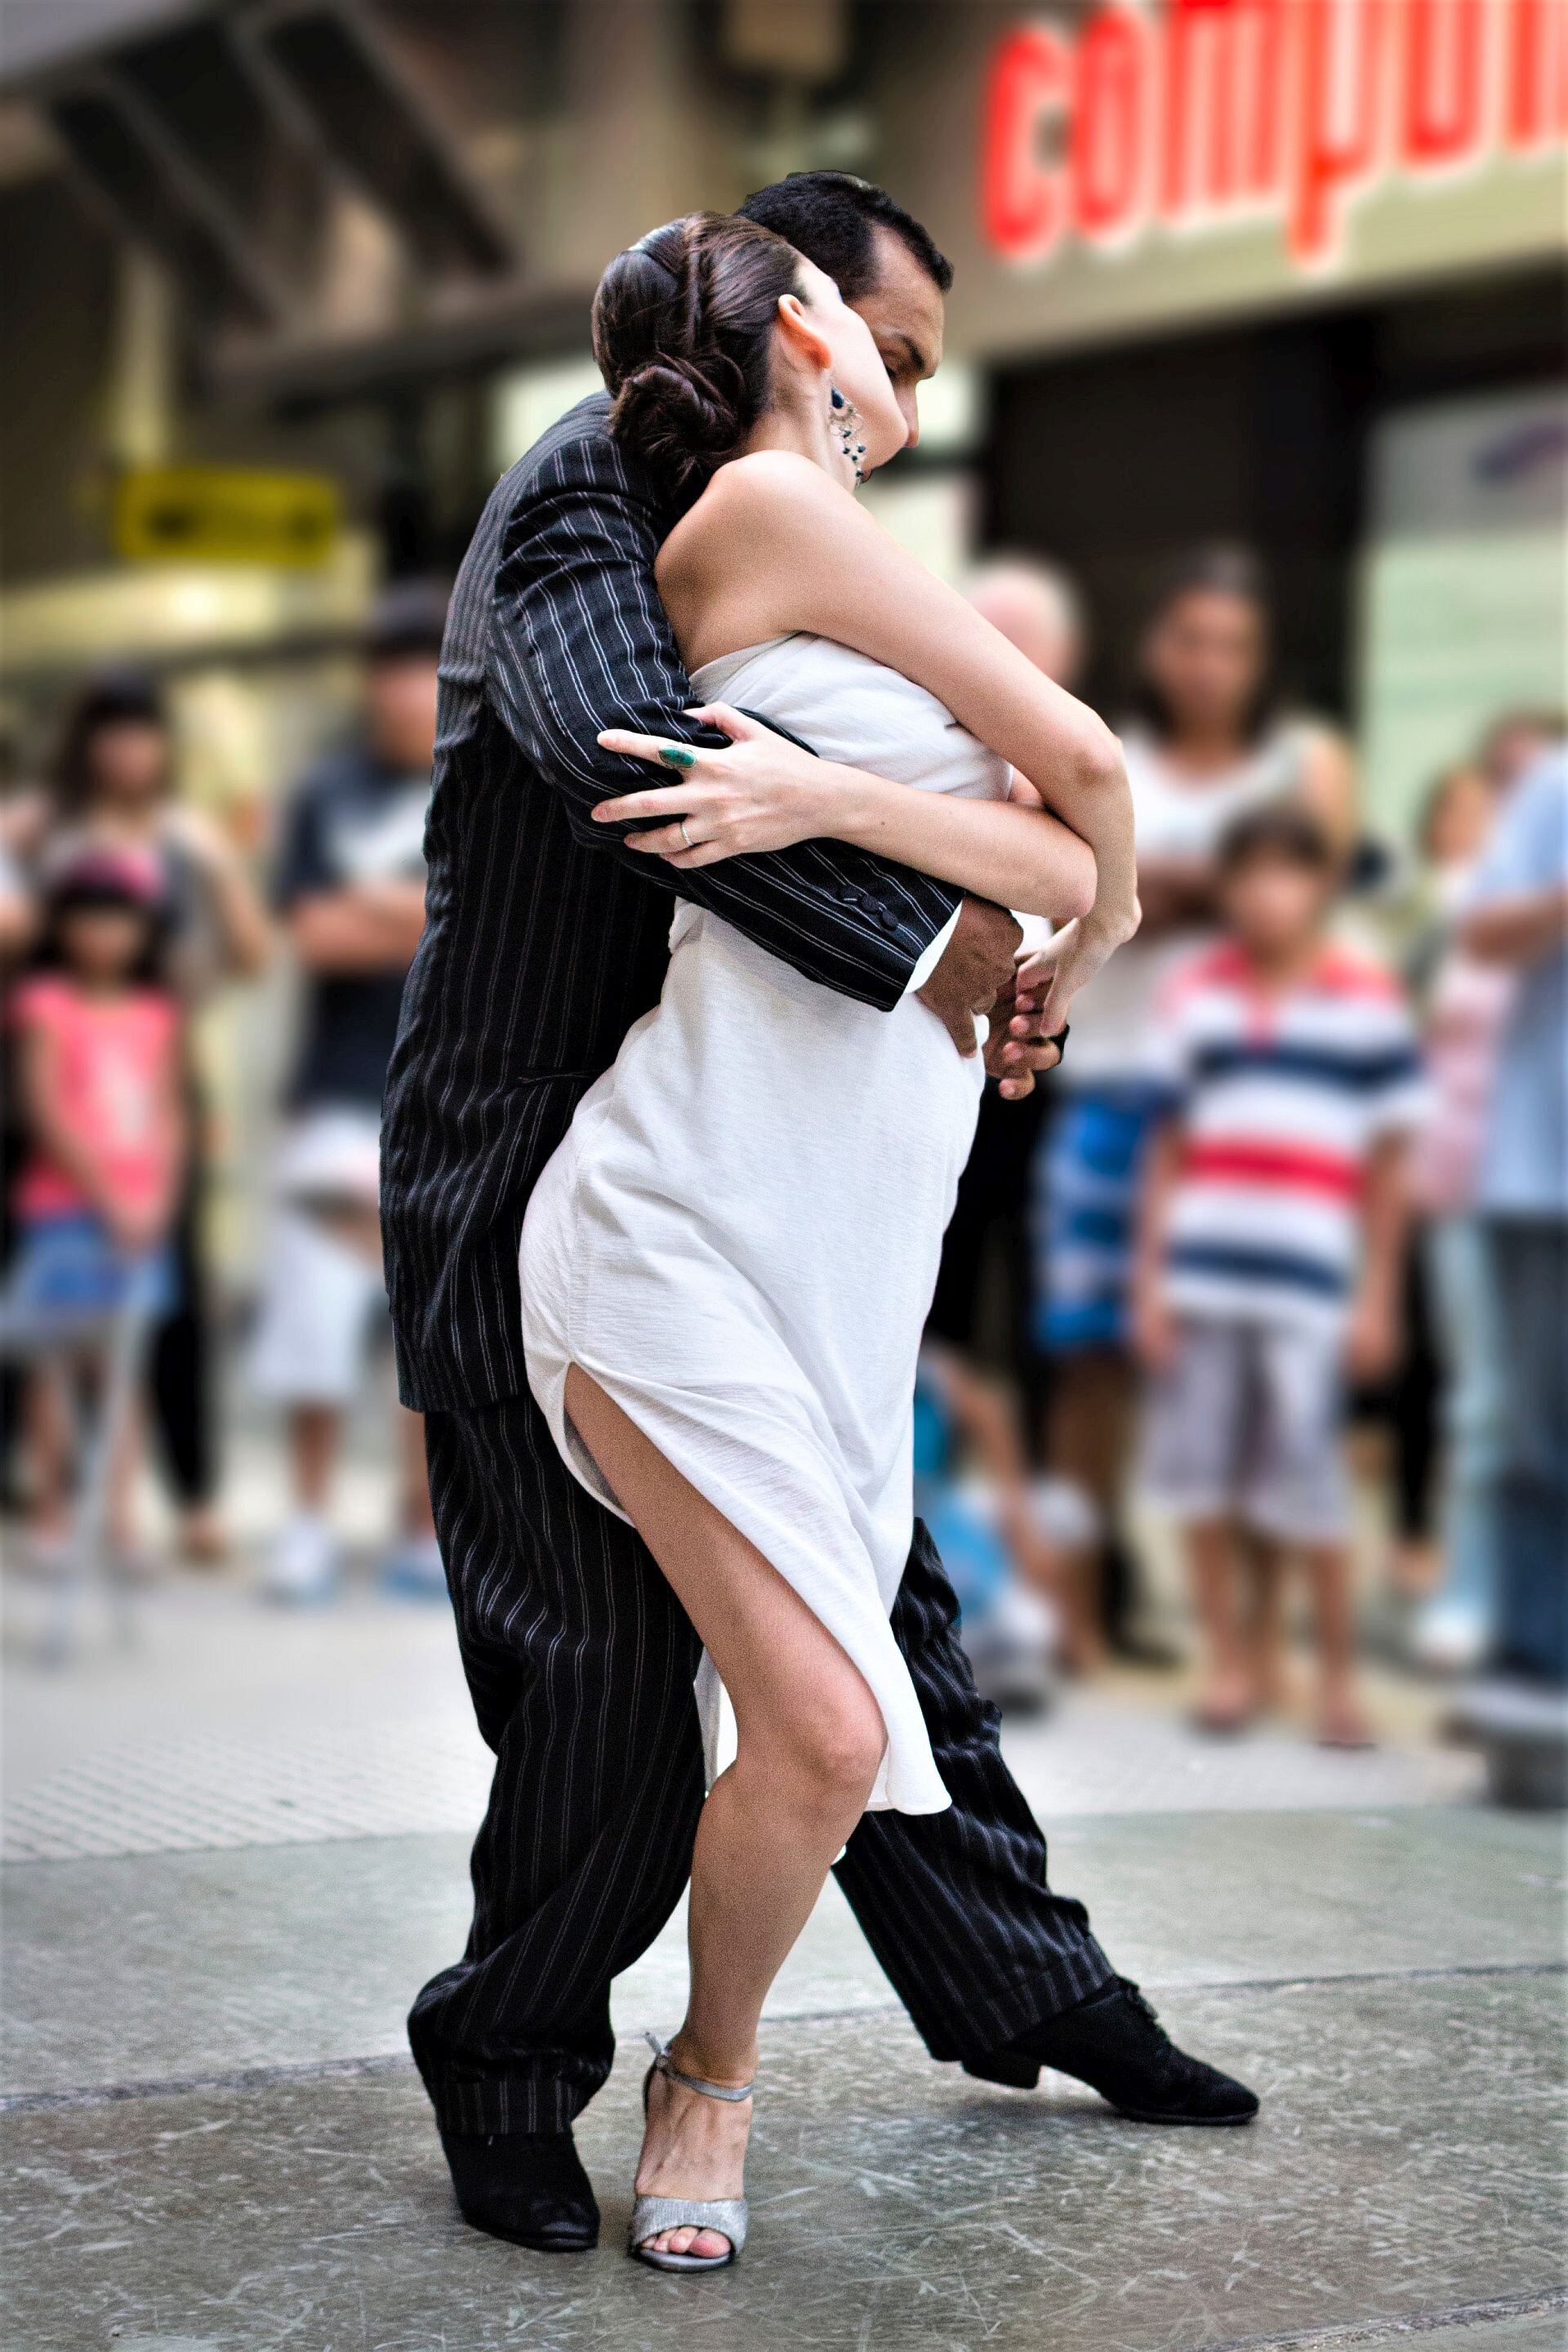 Dancing the tango in Buenos Aires, Argentina